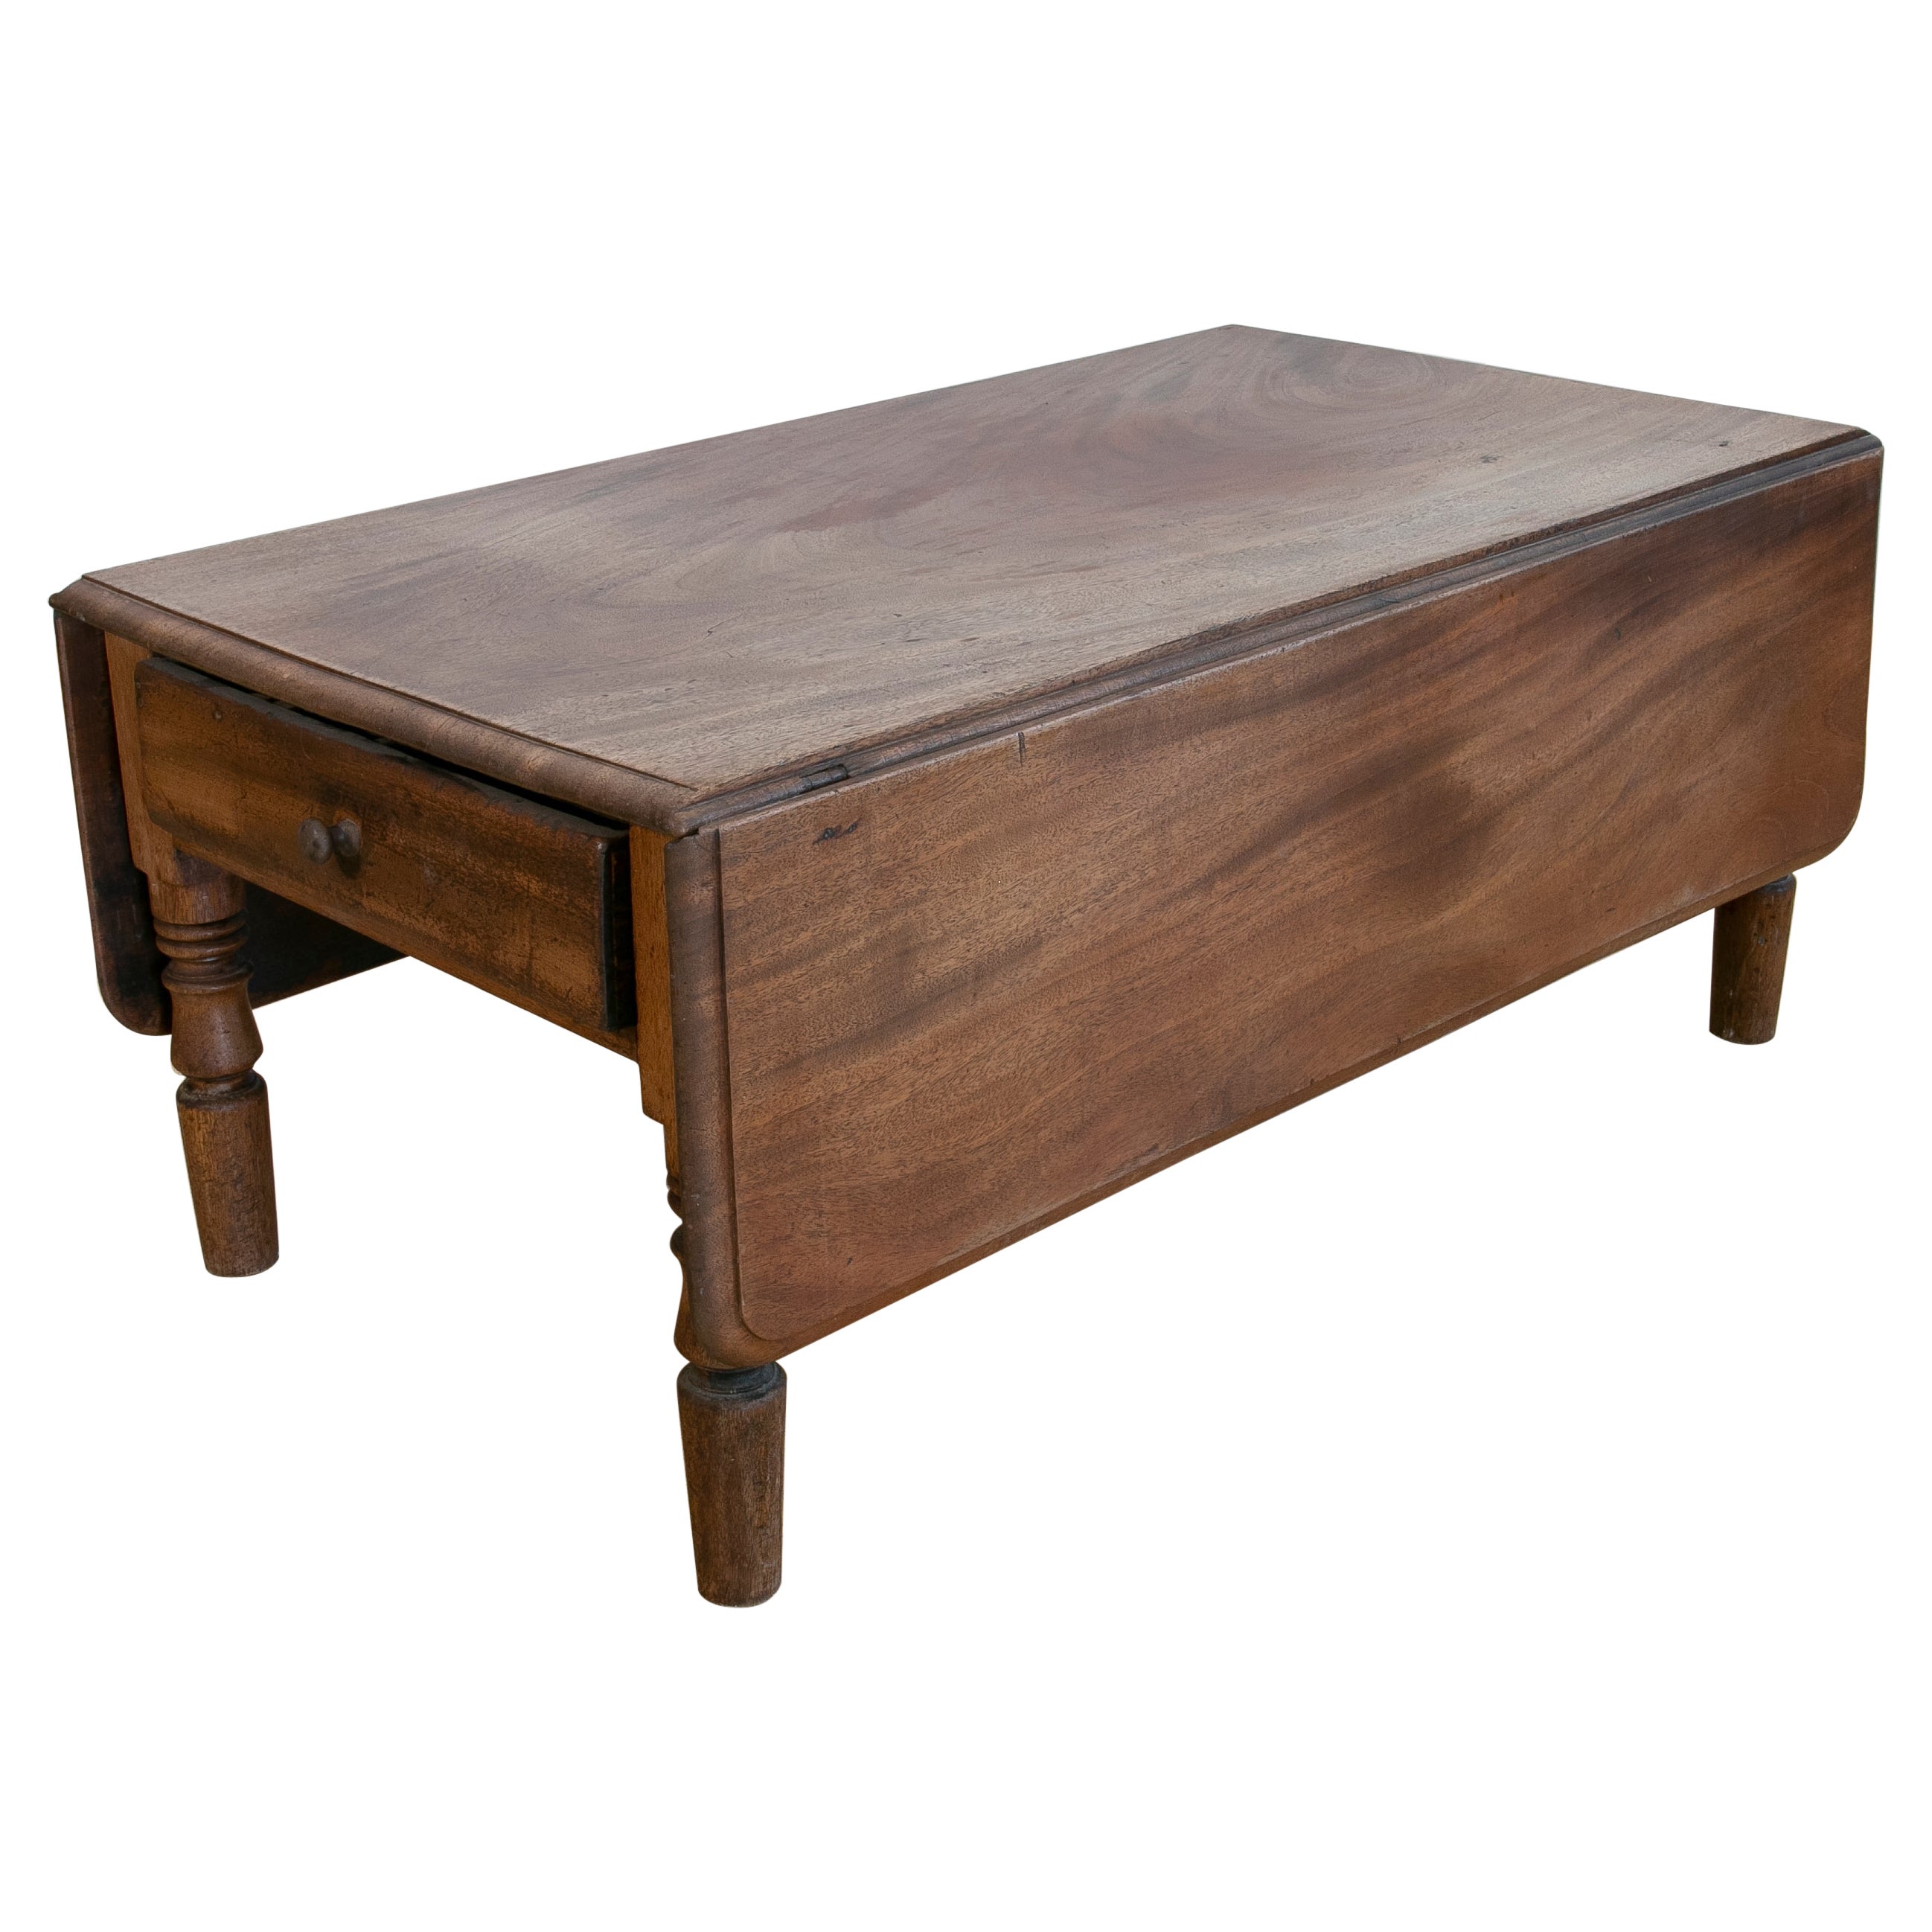 Wooden Coffee Wing Table with Drawers on the Side For Sale